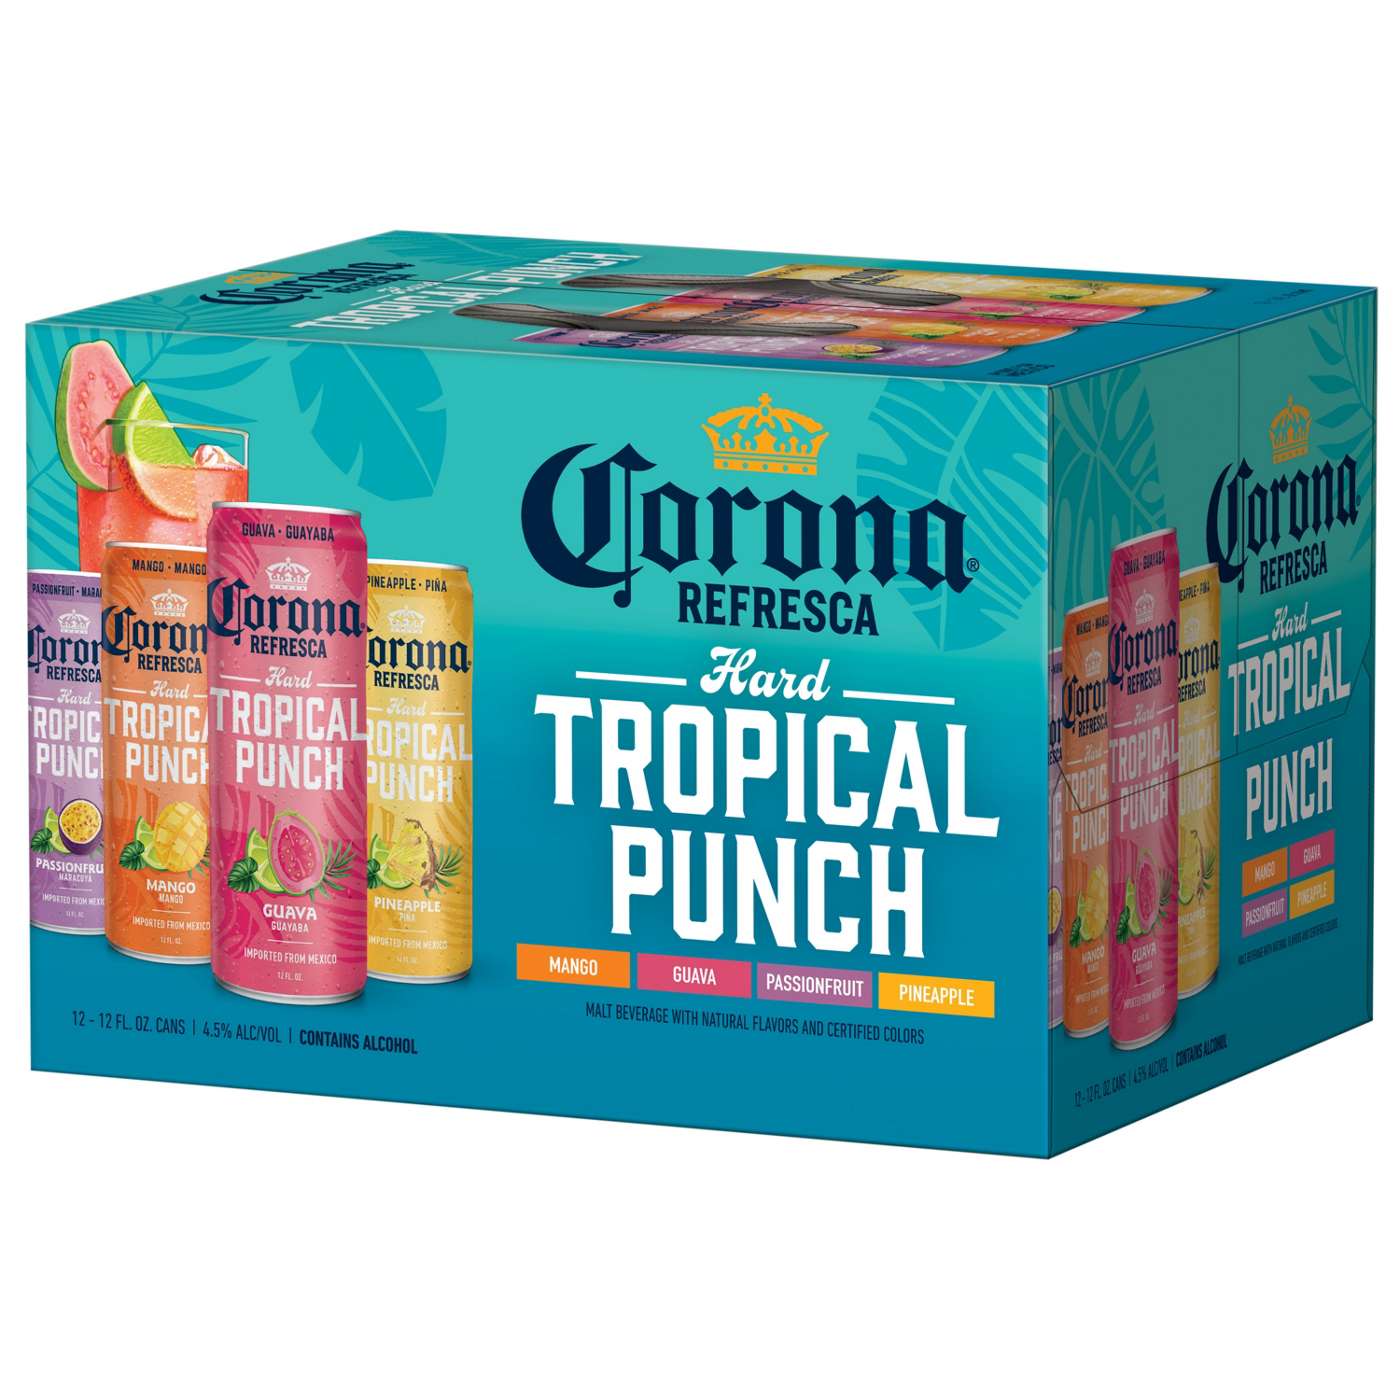 Corona Refresca Hard Tropical Punch Variety Pack 12 oz Cans, 12 pk; image 8 of 10